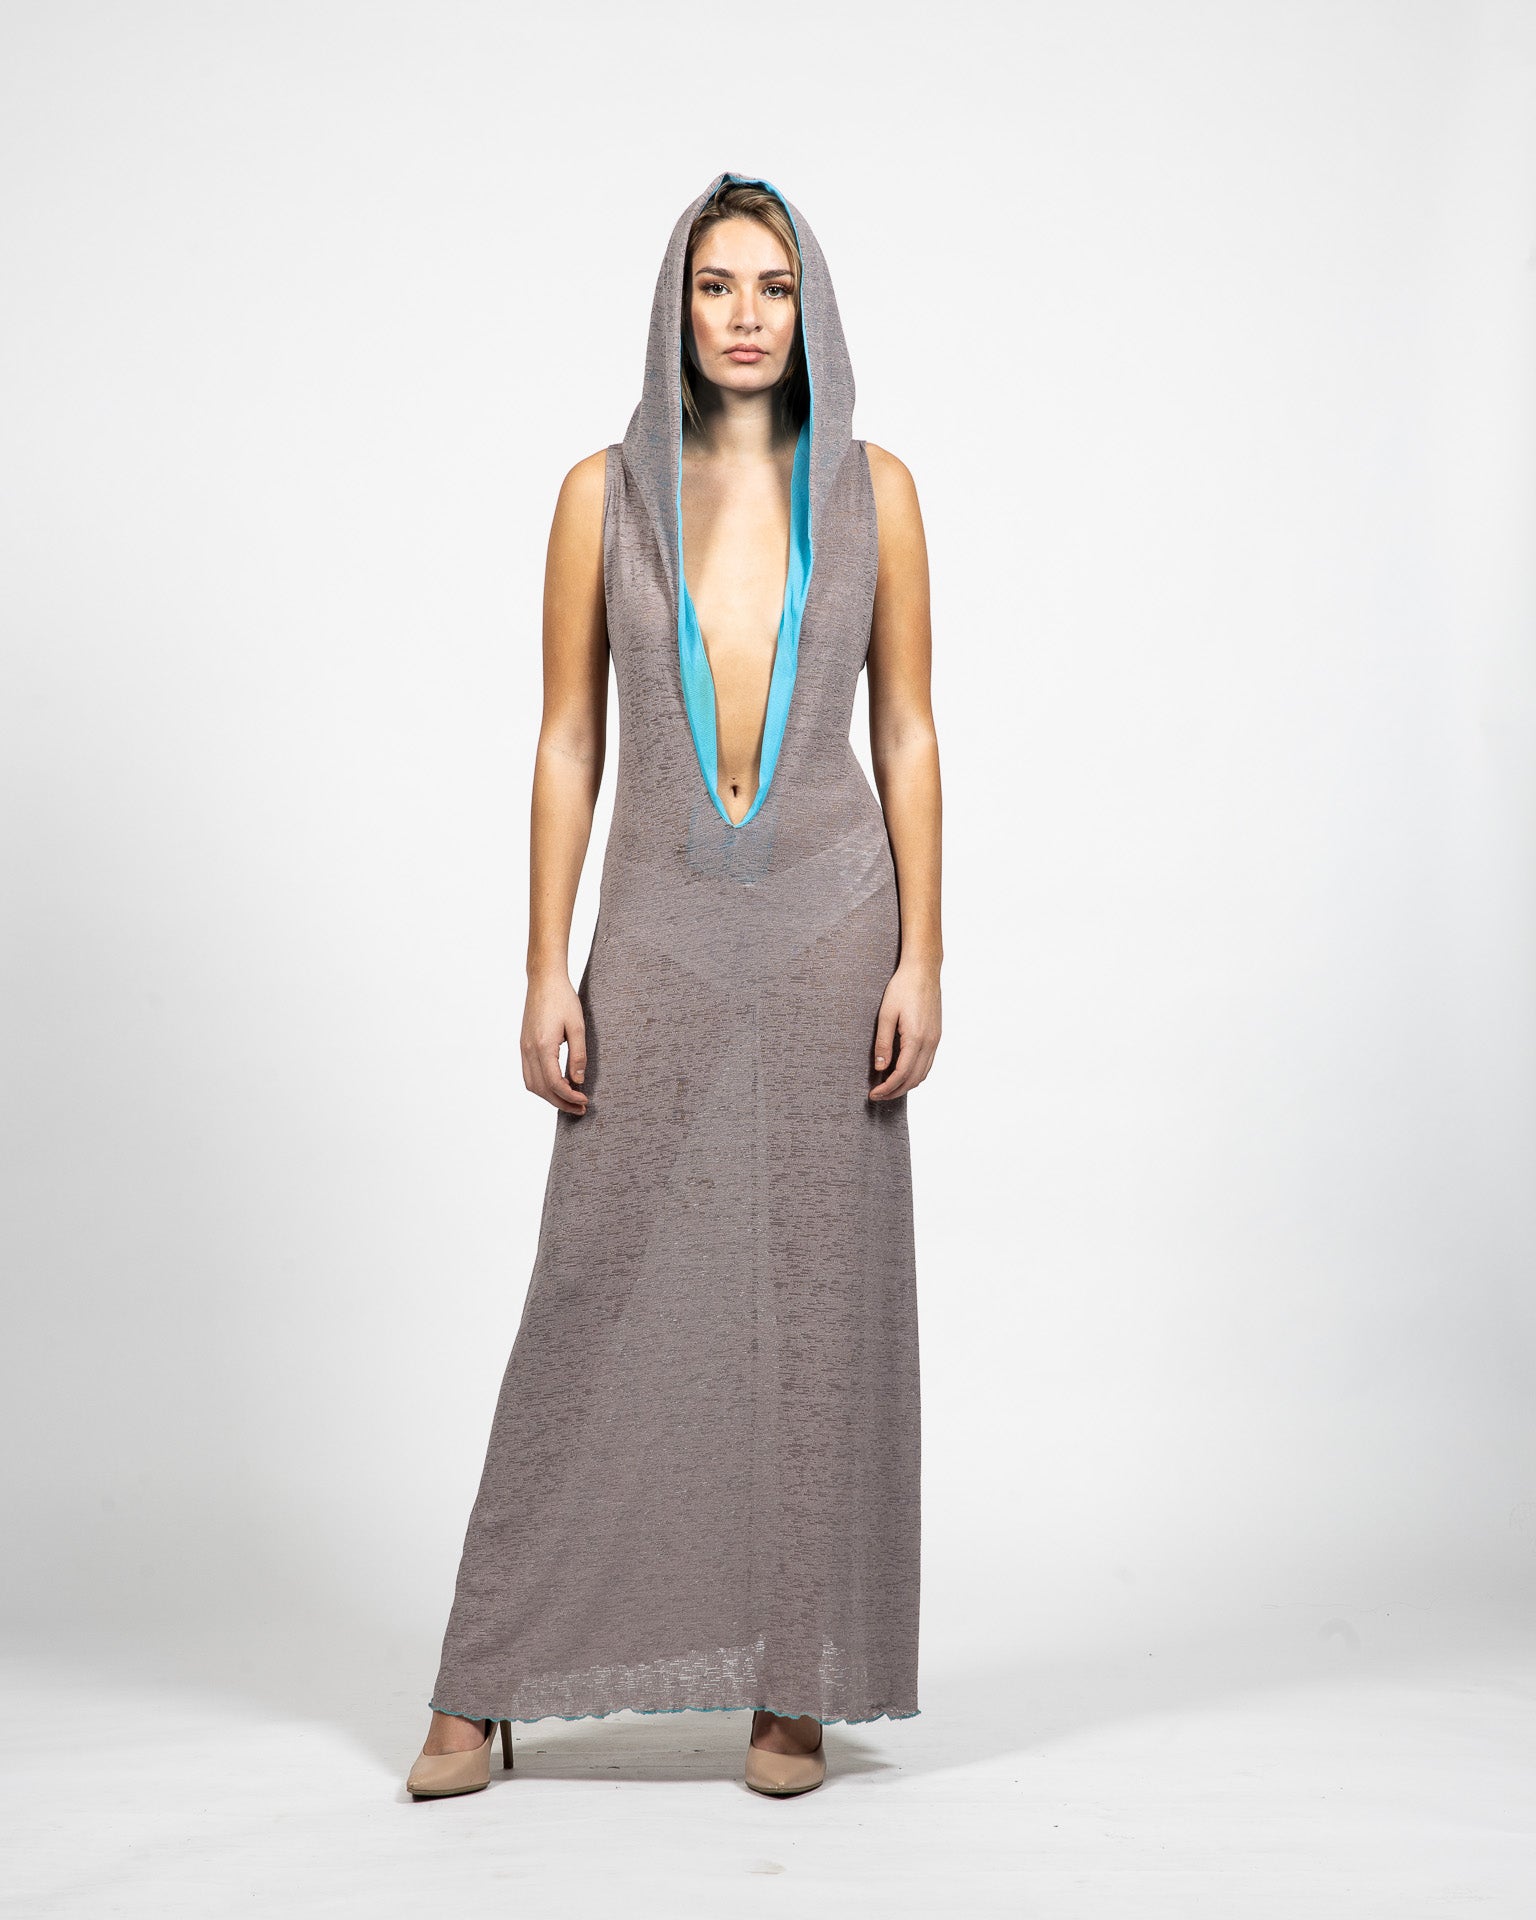 Long Grey Hooded Dress With Blue Accents - Front View - Samuel Vartan